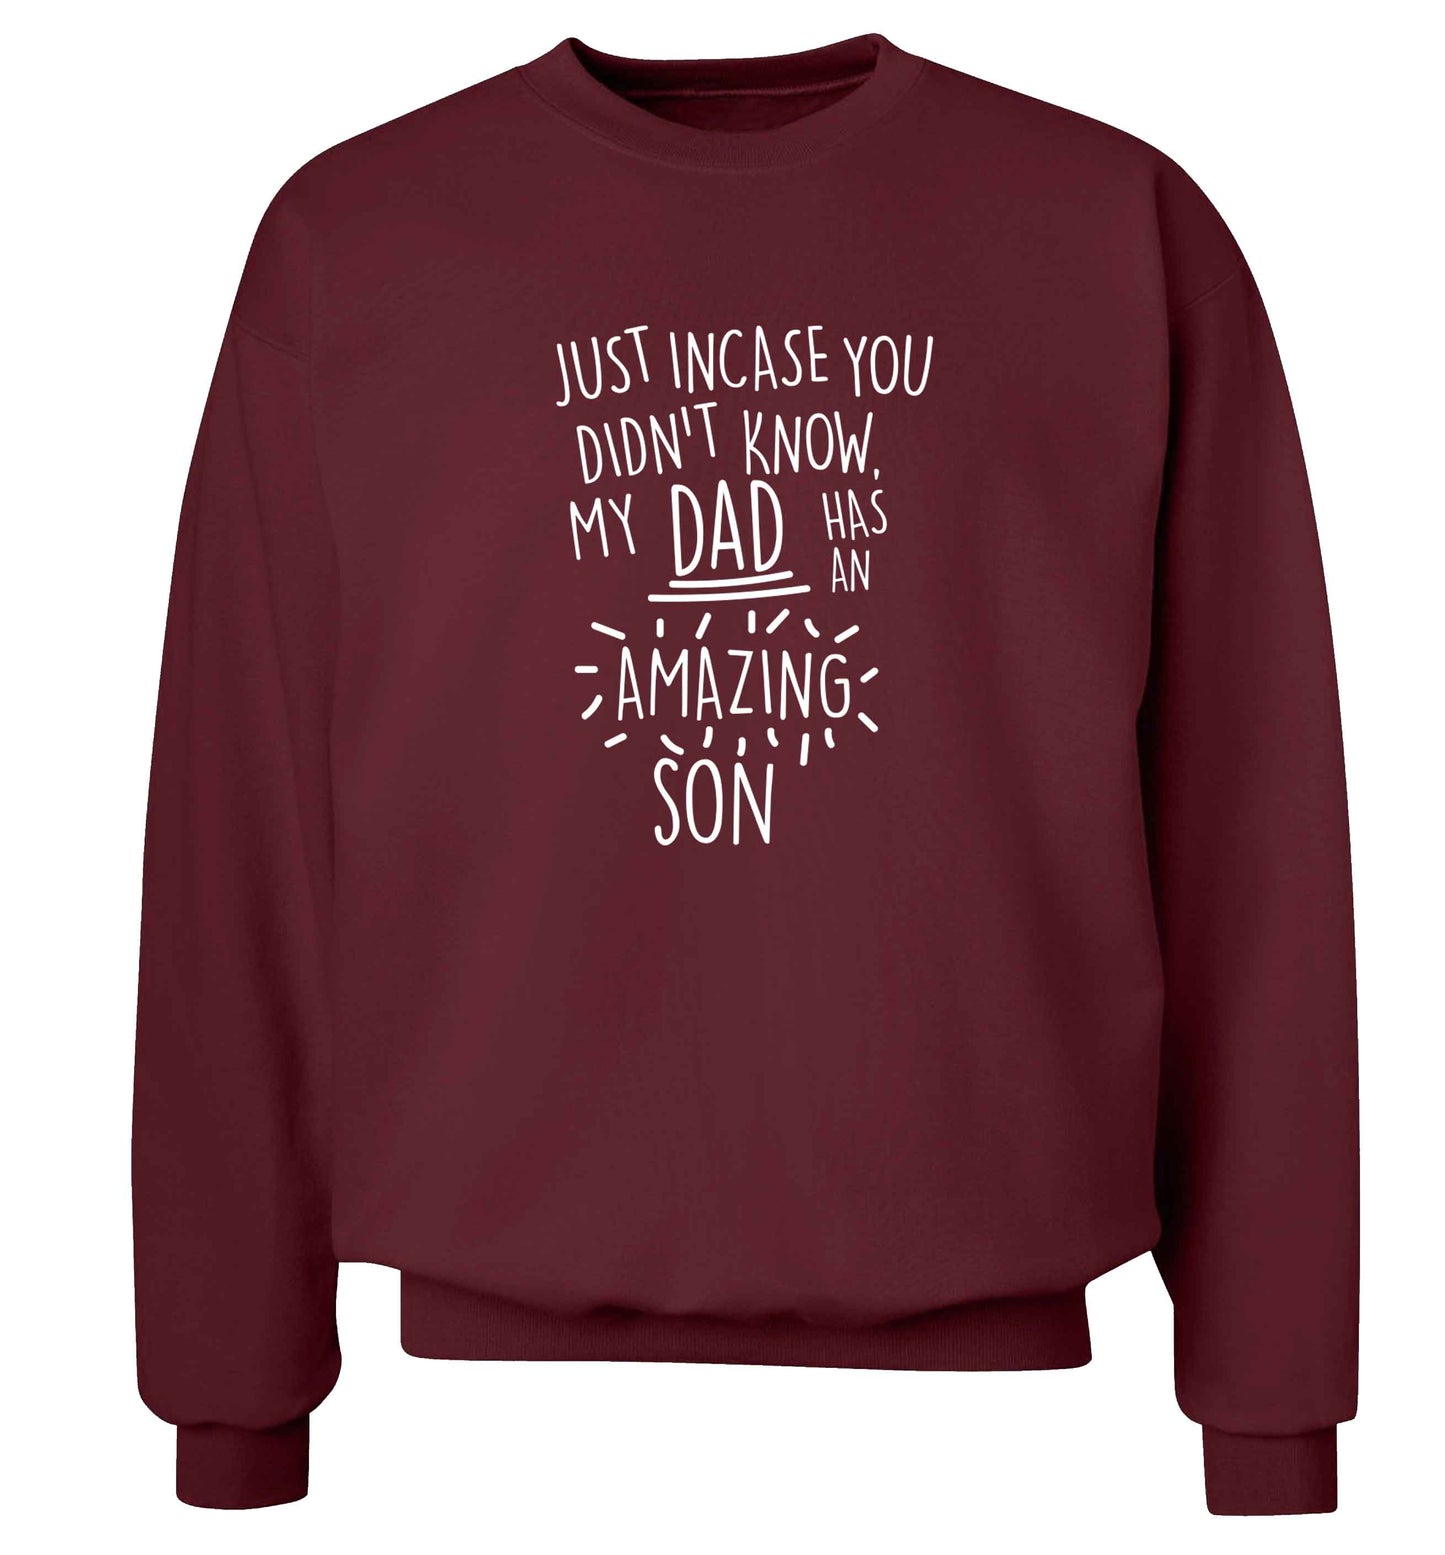 Just incase you didn't know my dad has an amazing son adult's unisex maroon sweater 2XL